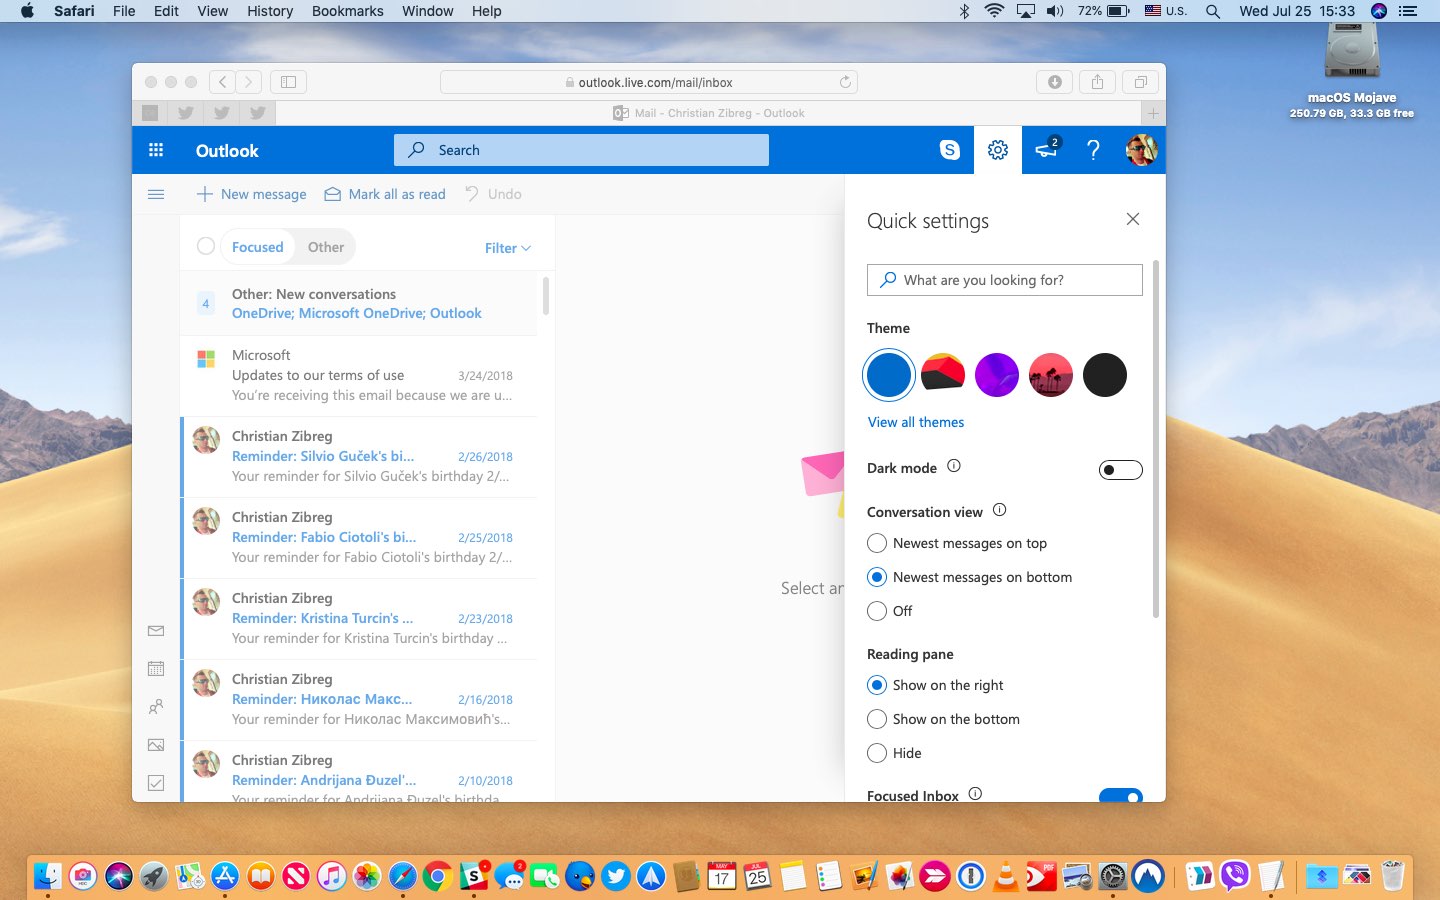 Outlook's Dark Mode is currently limited to the default blue theme.